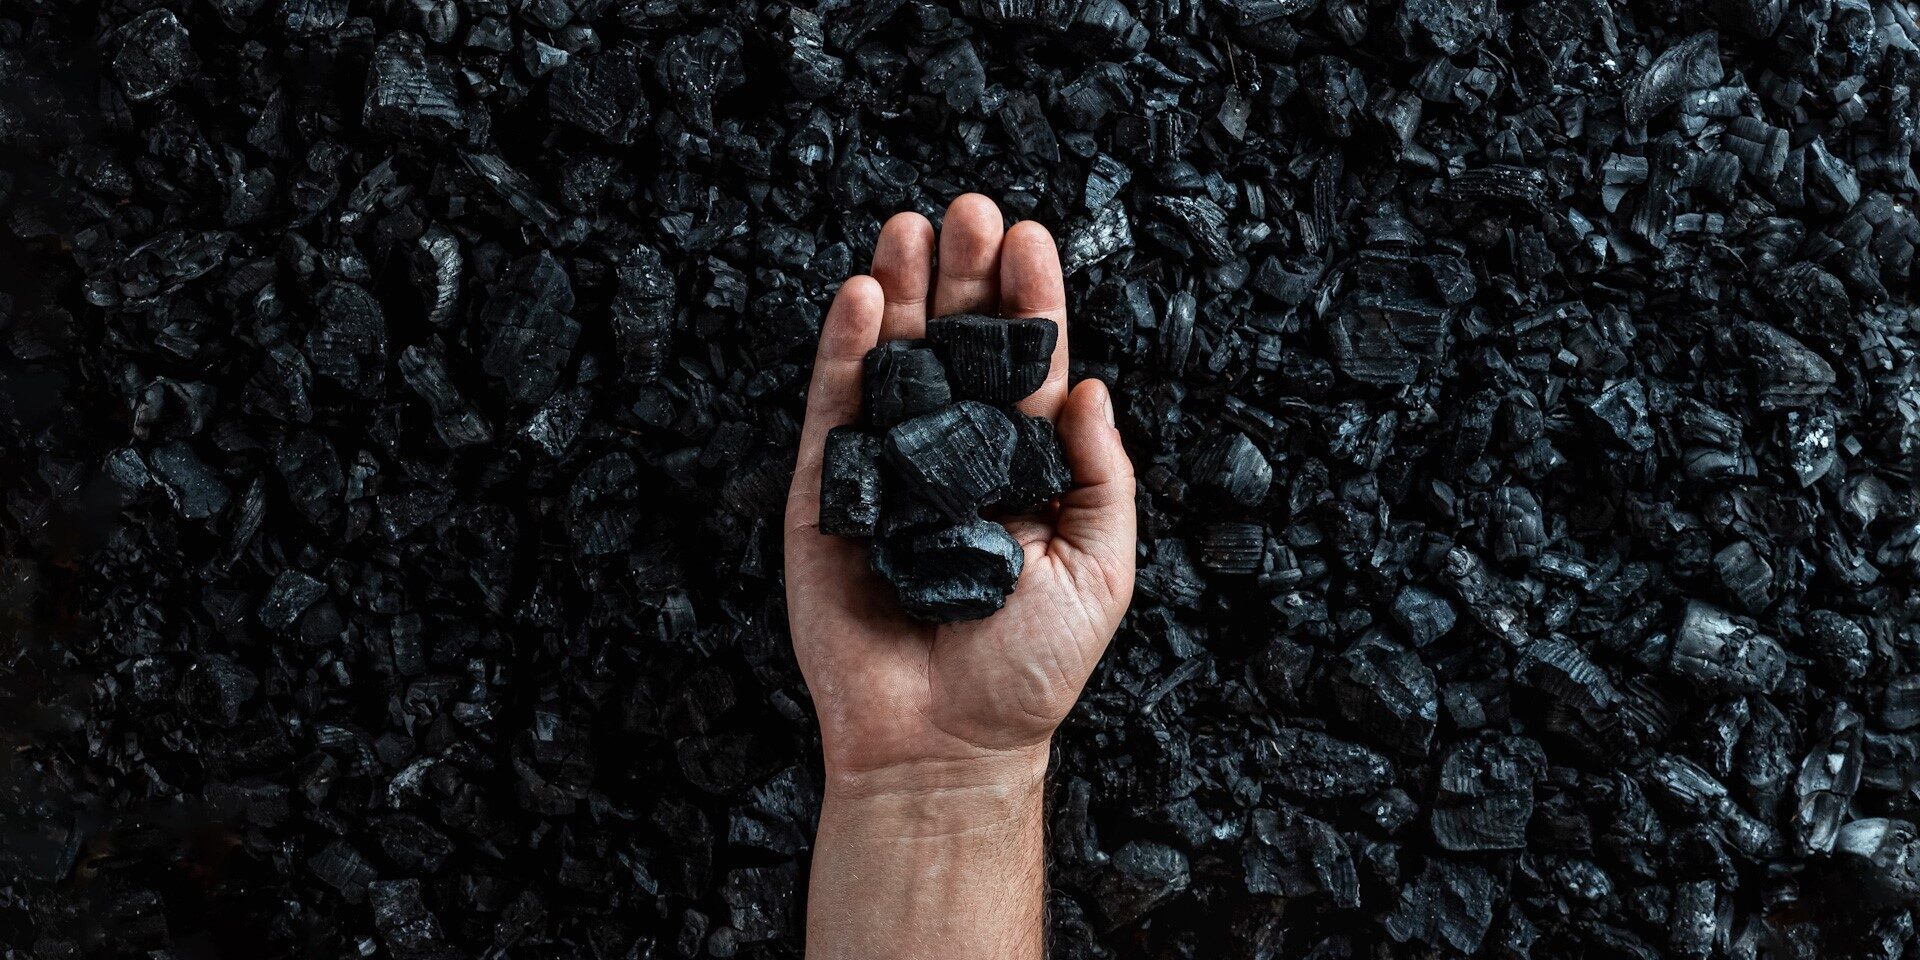 A background of coal, with a hand holding more coal set against it.